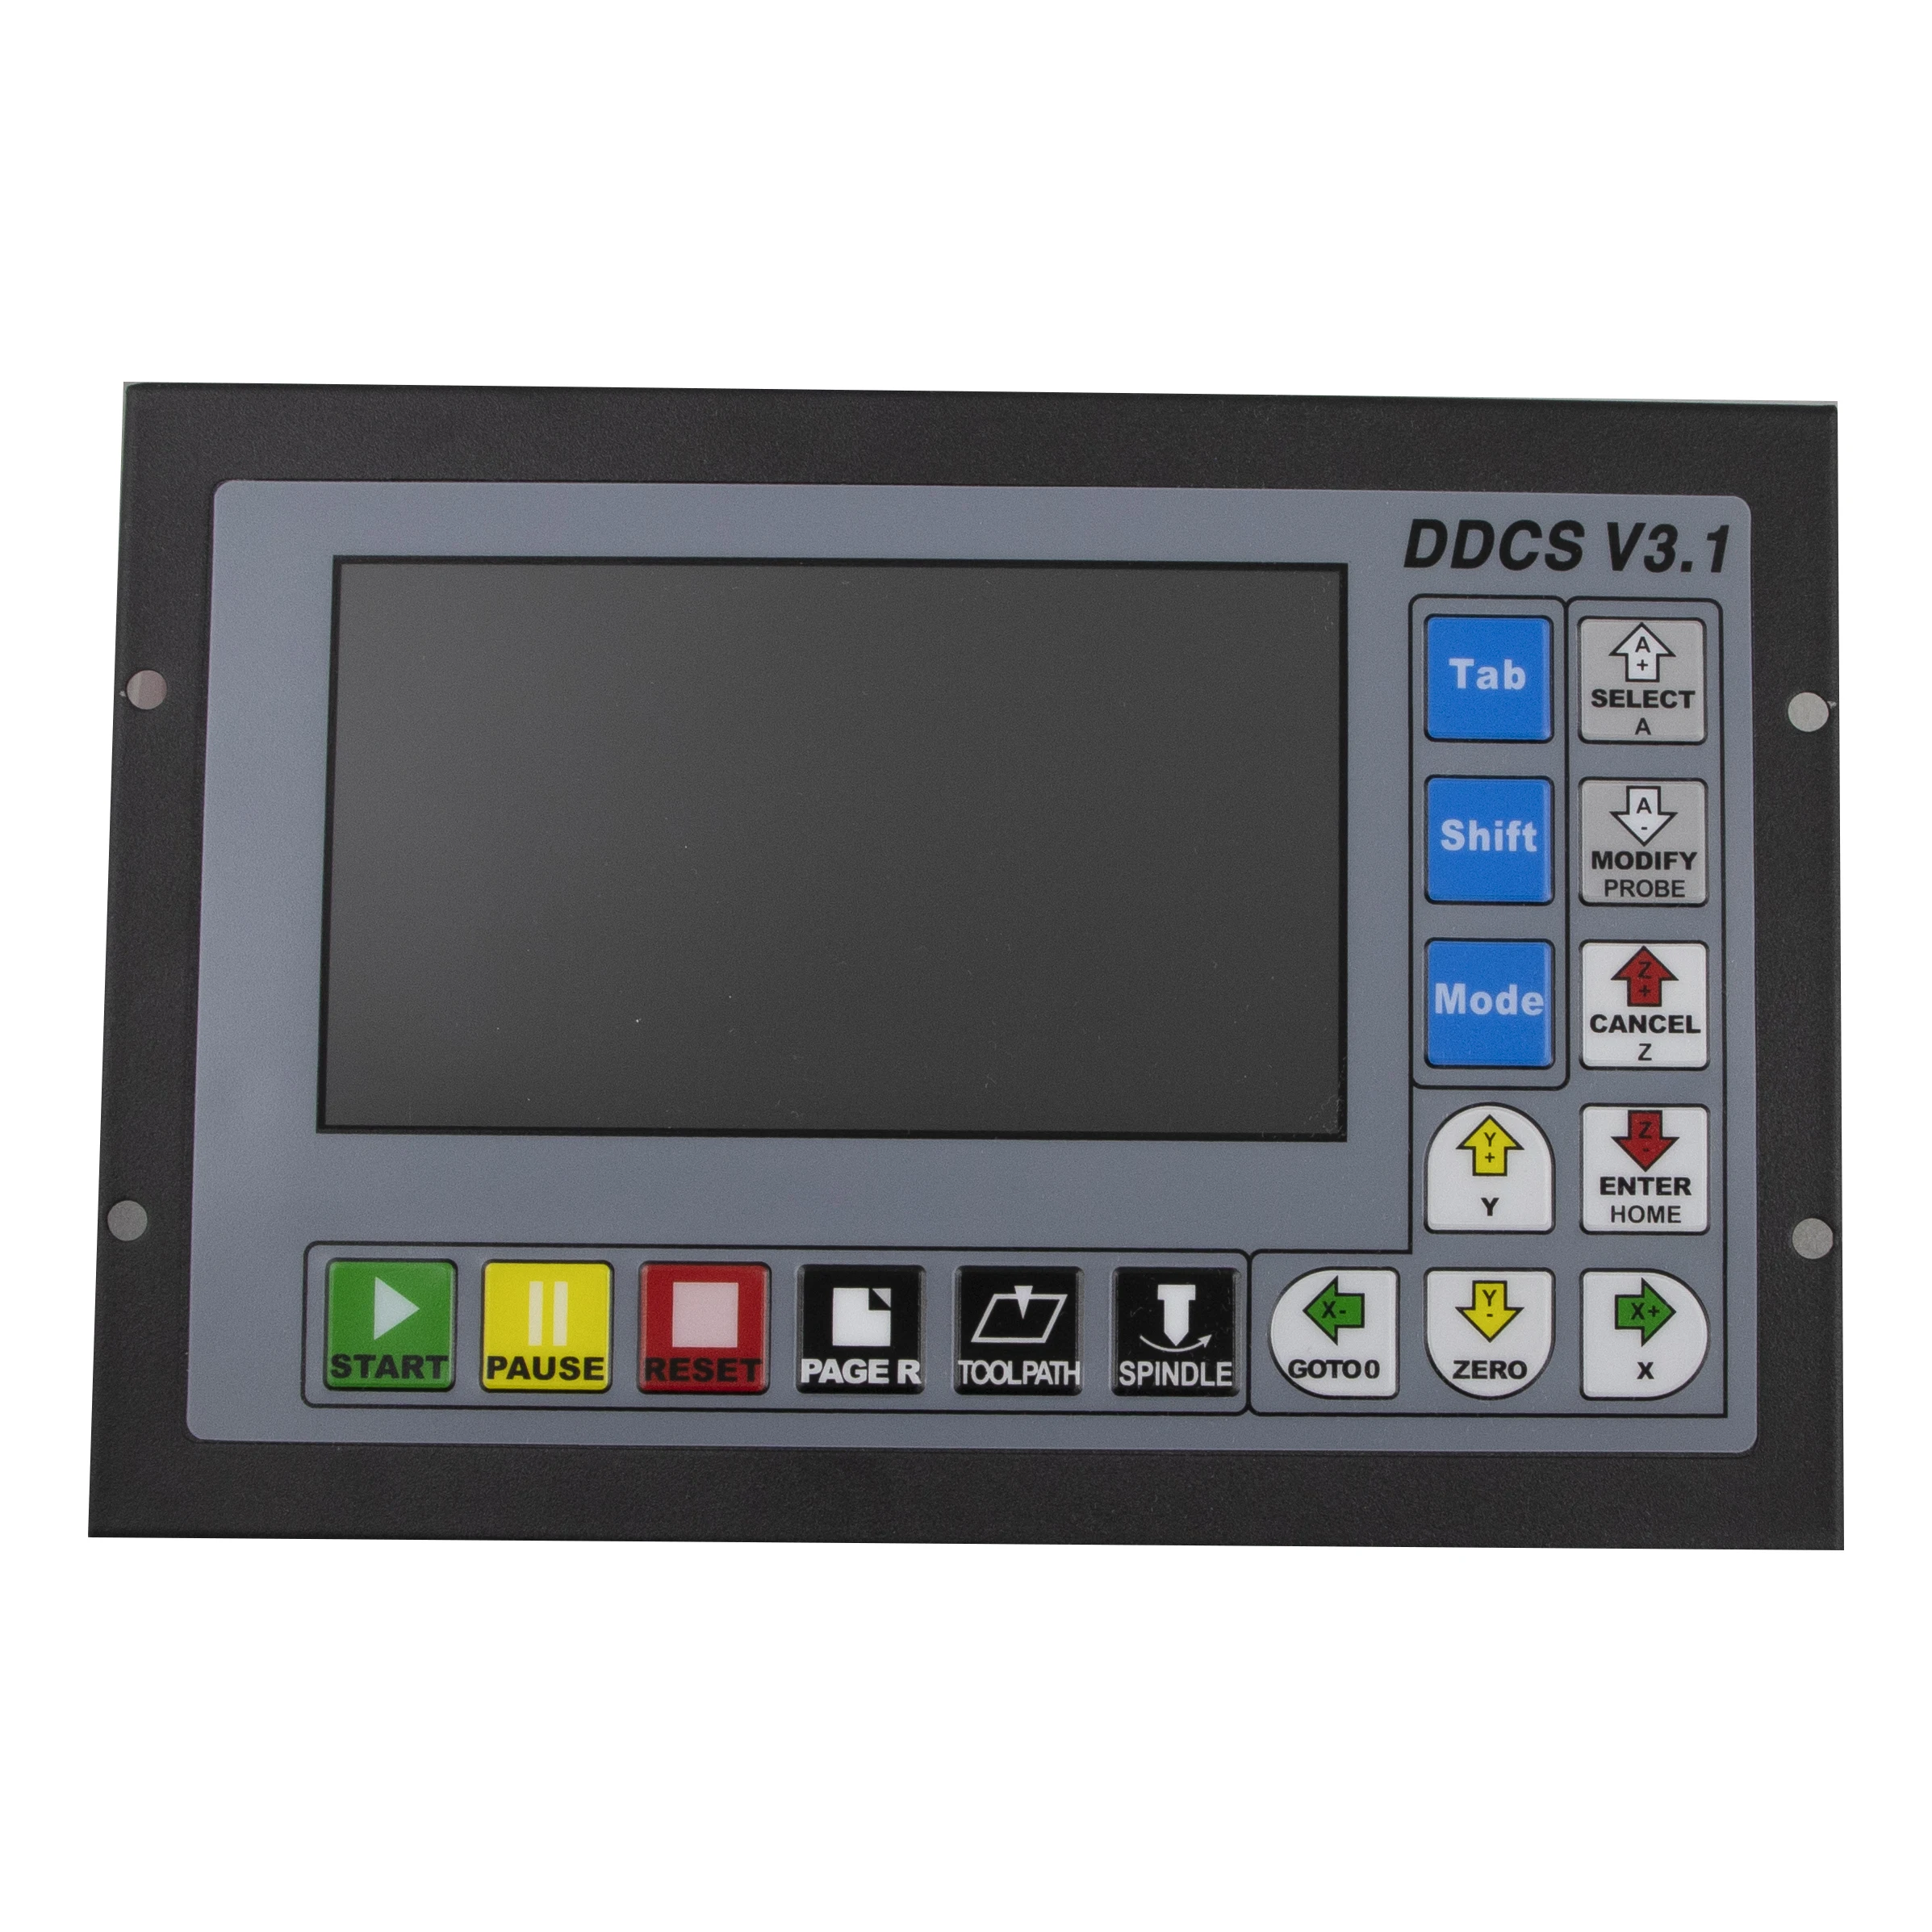 
Digital Dream DDCS3 V3.1 3 Axis Standalone/Offline CNC Motion Controller for CNC Router Milling Machine Updated from DDCS V2.1  (62075472165)